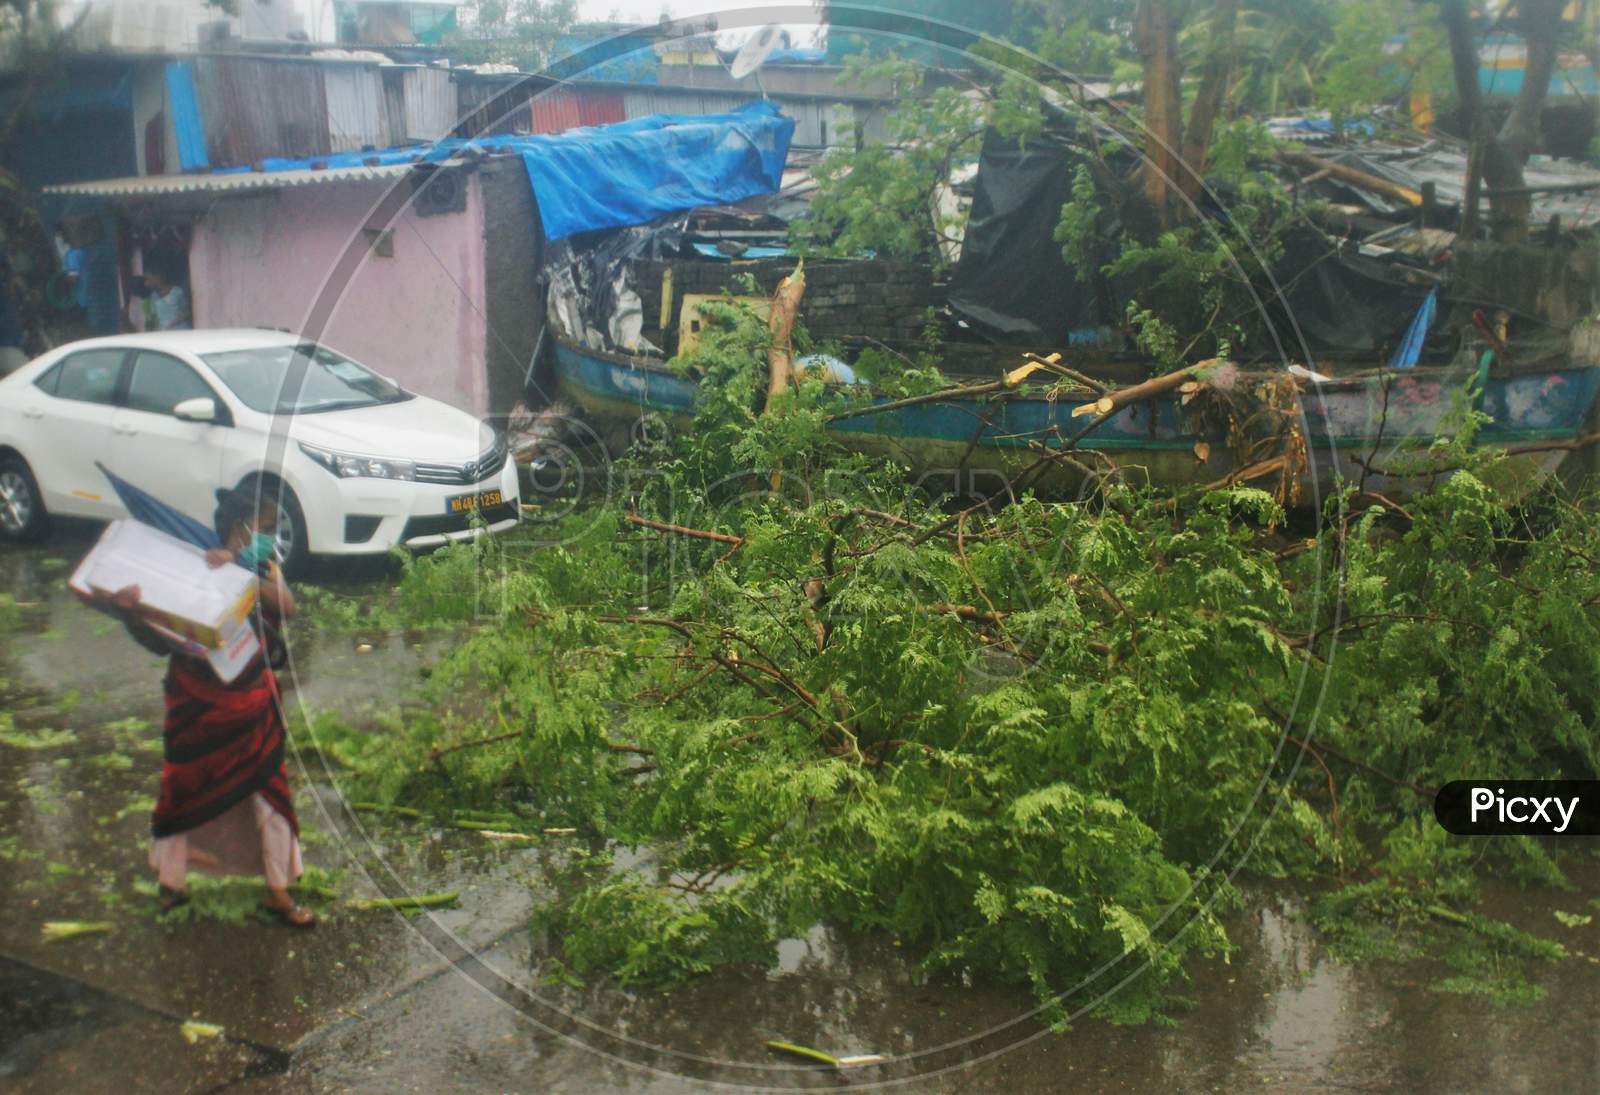 A man walks past a tree fallen on a boat as cyclone Nisarga makes its landfall on the outskirts of the city, in Mumbai, India, June 3, 2020.